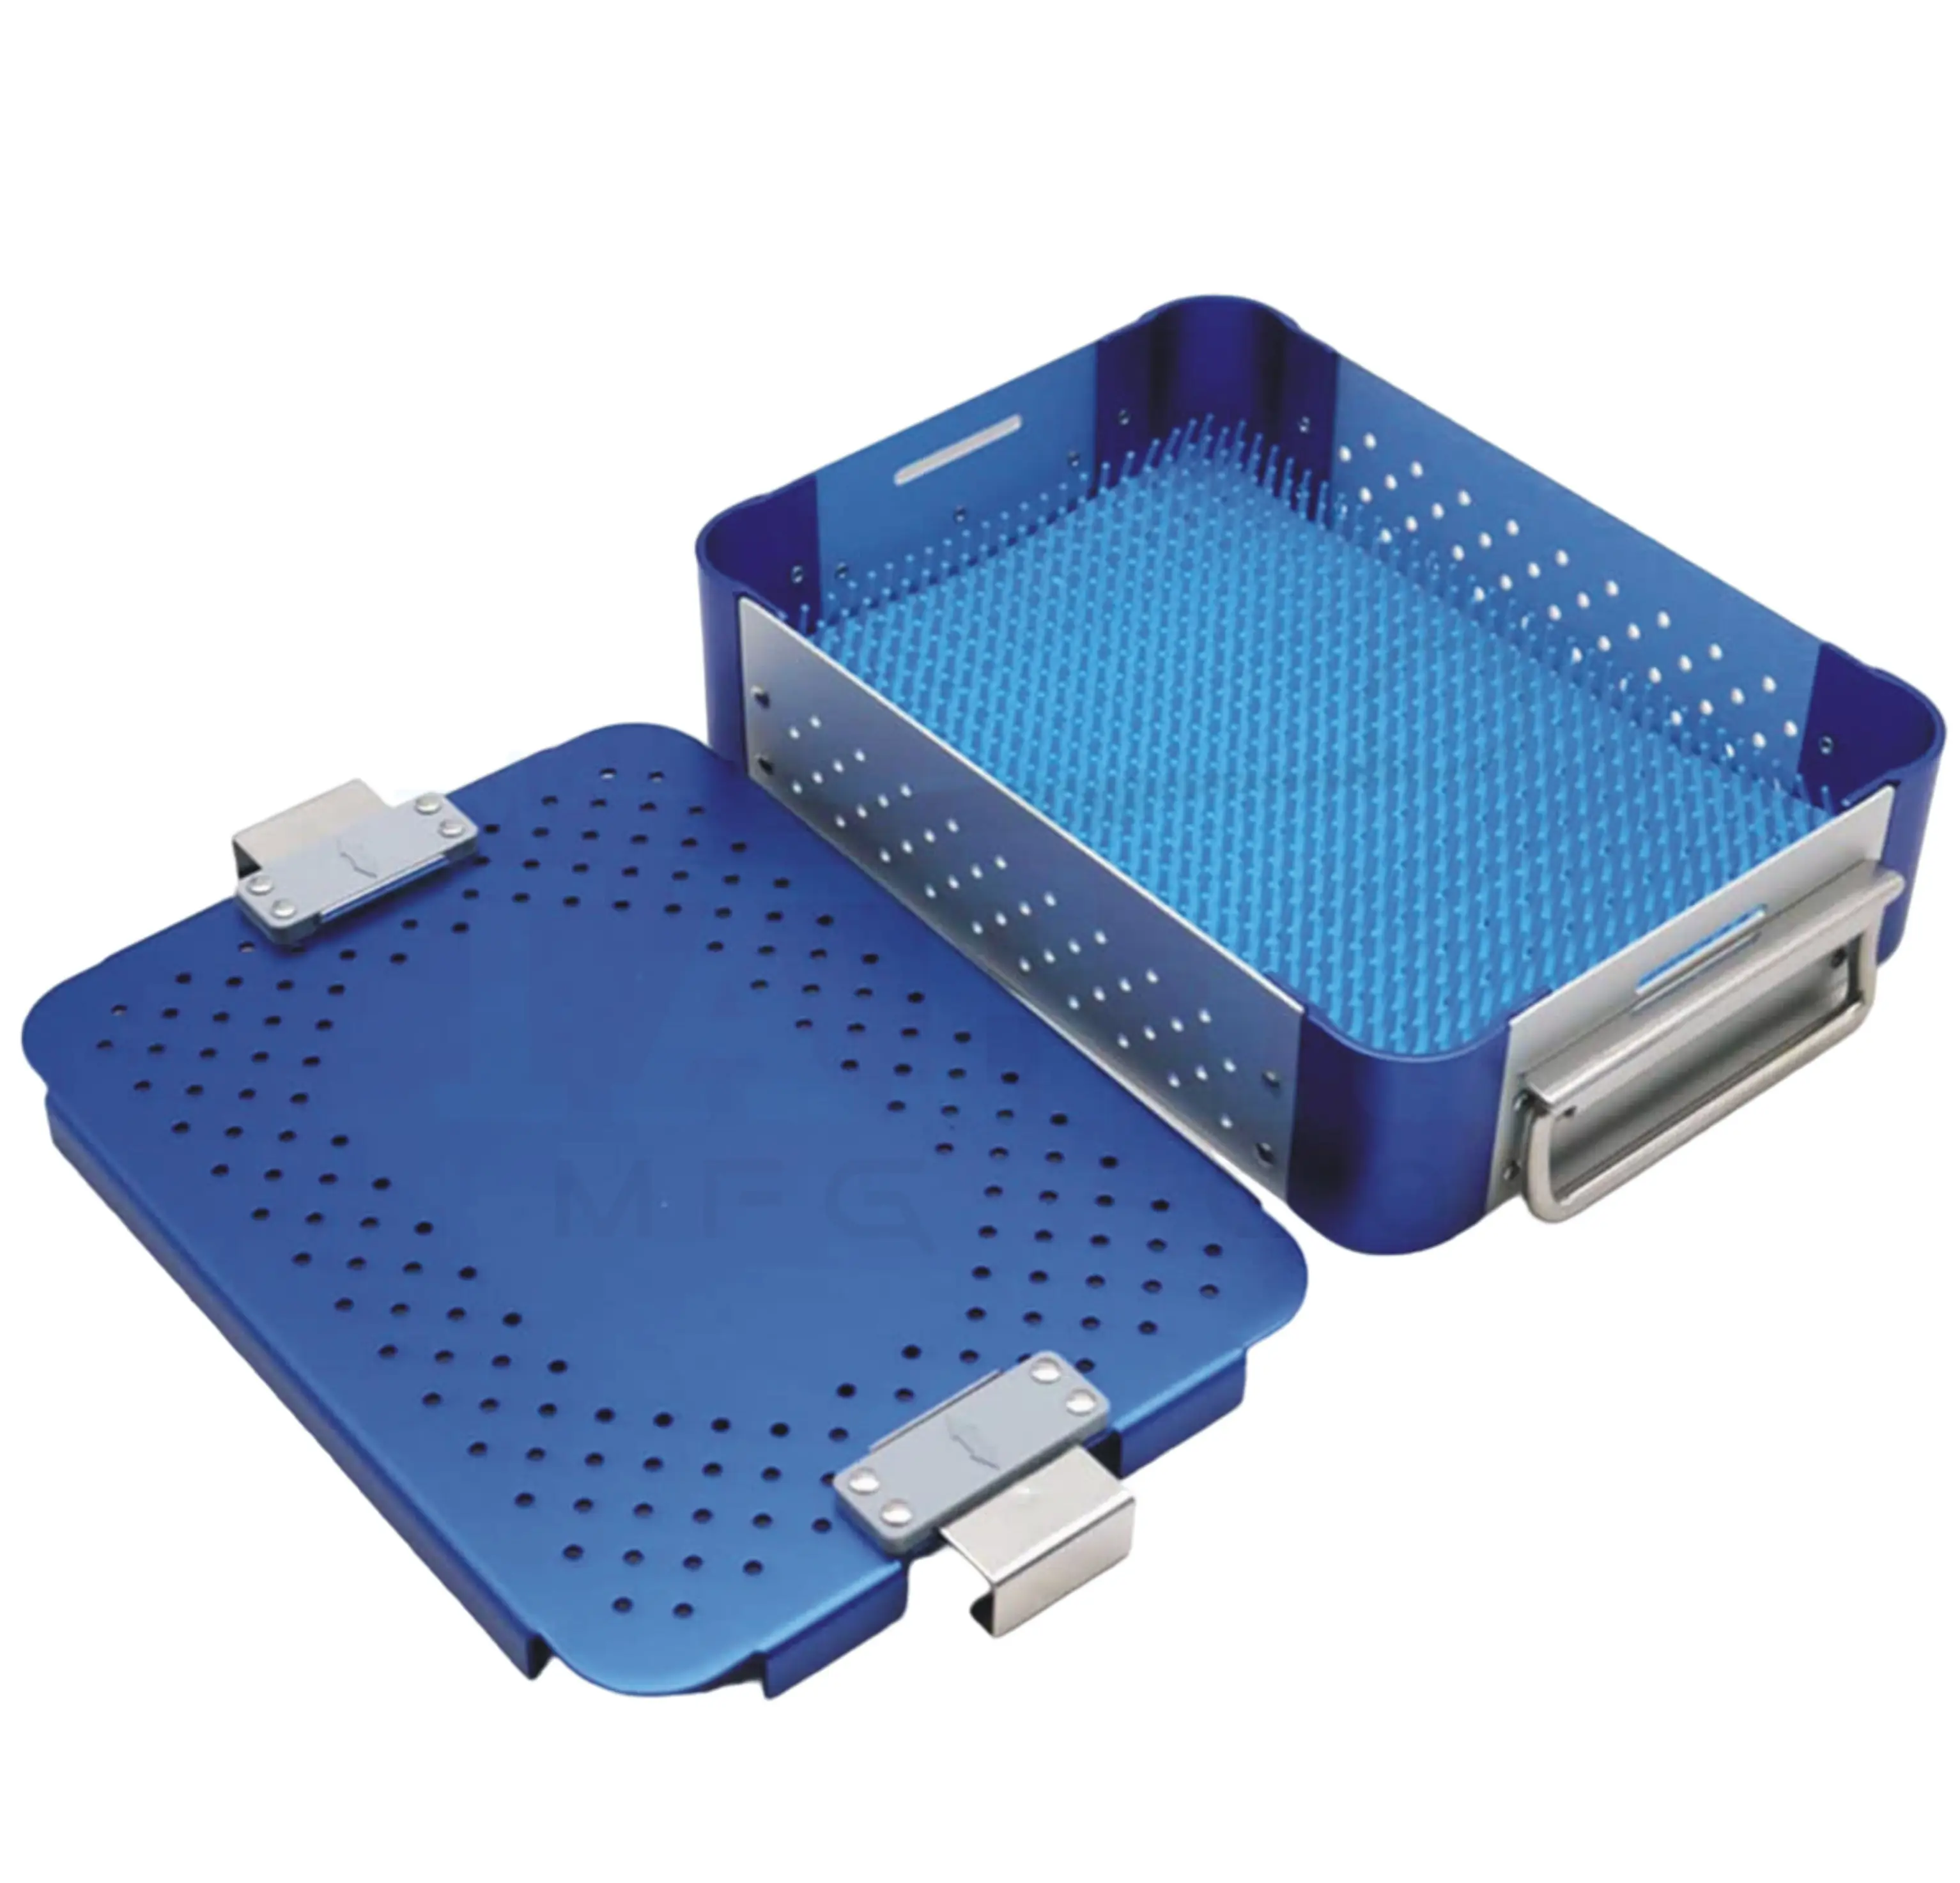 New Arrival Aluminum Alloy Sterilization Tray Case with Silicone Mat Surgical Veterinary Instrument